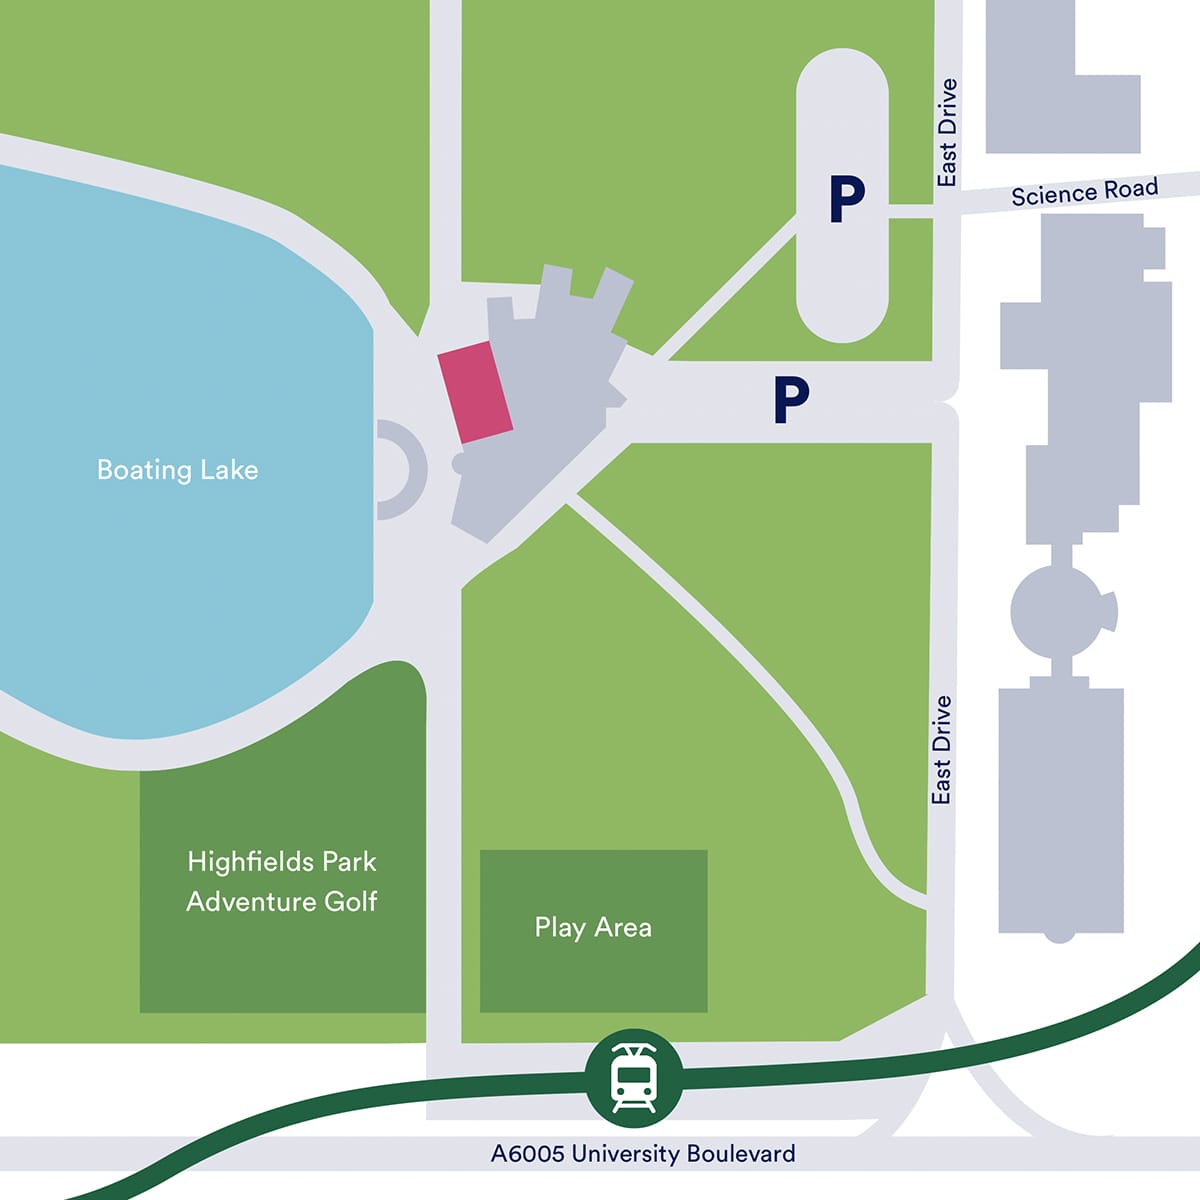 A map showing where the Djanogly Theatre is located in relation to Lakeside Arts' buildings and the surrounding parkland.